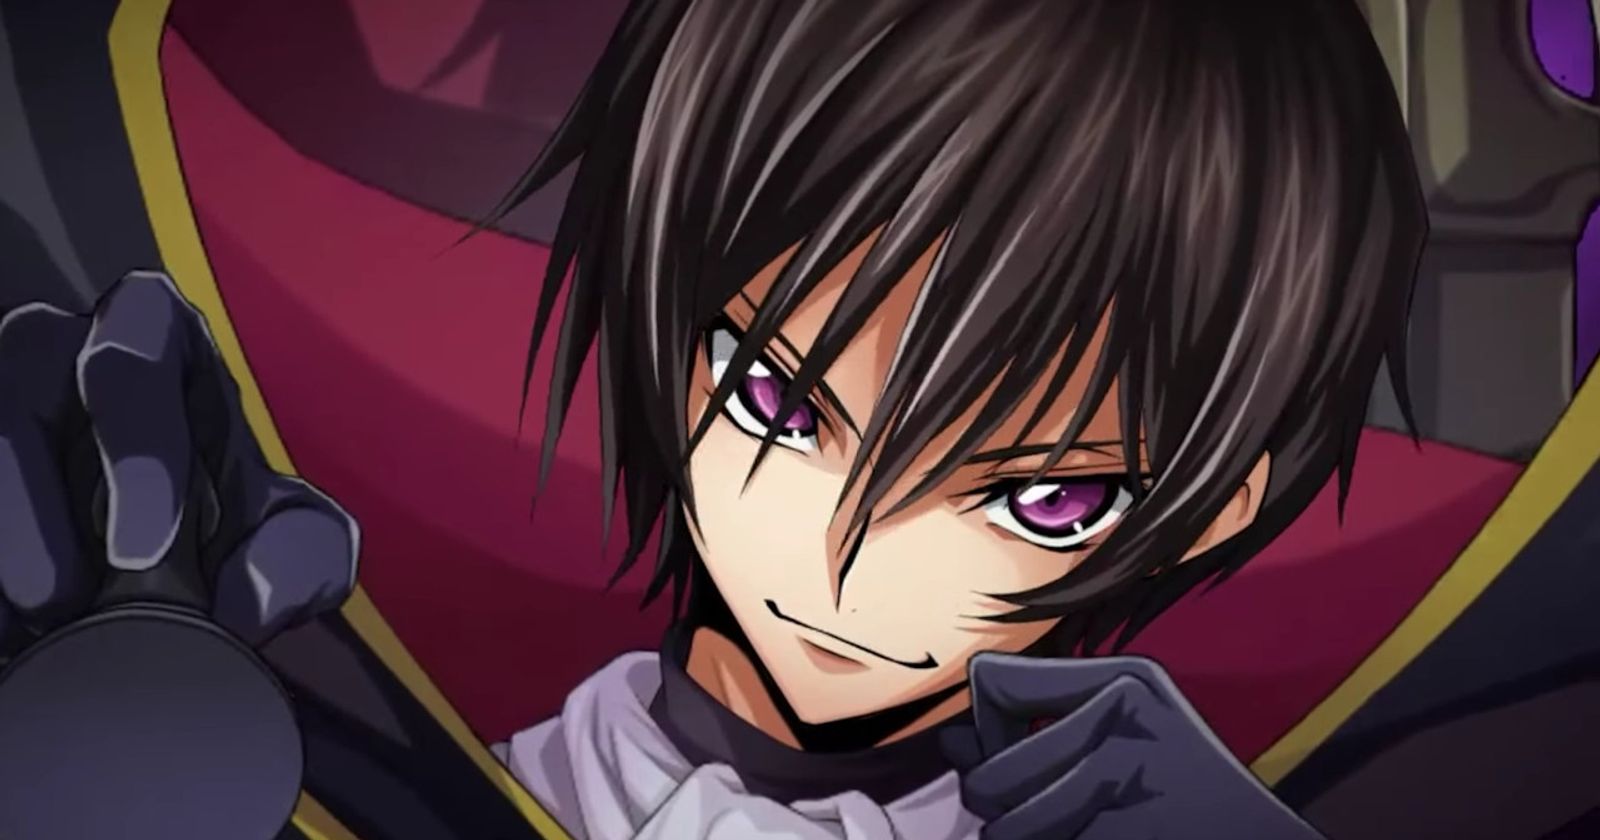 Code Geass: Lost Stories Mobile Game Launches in English - News